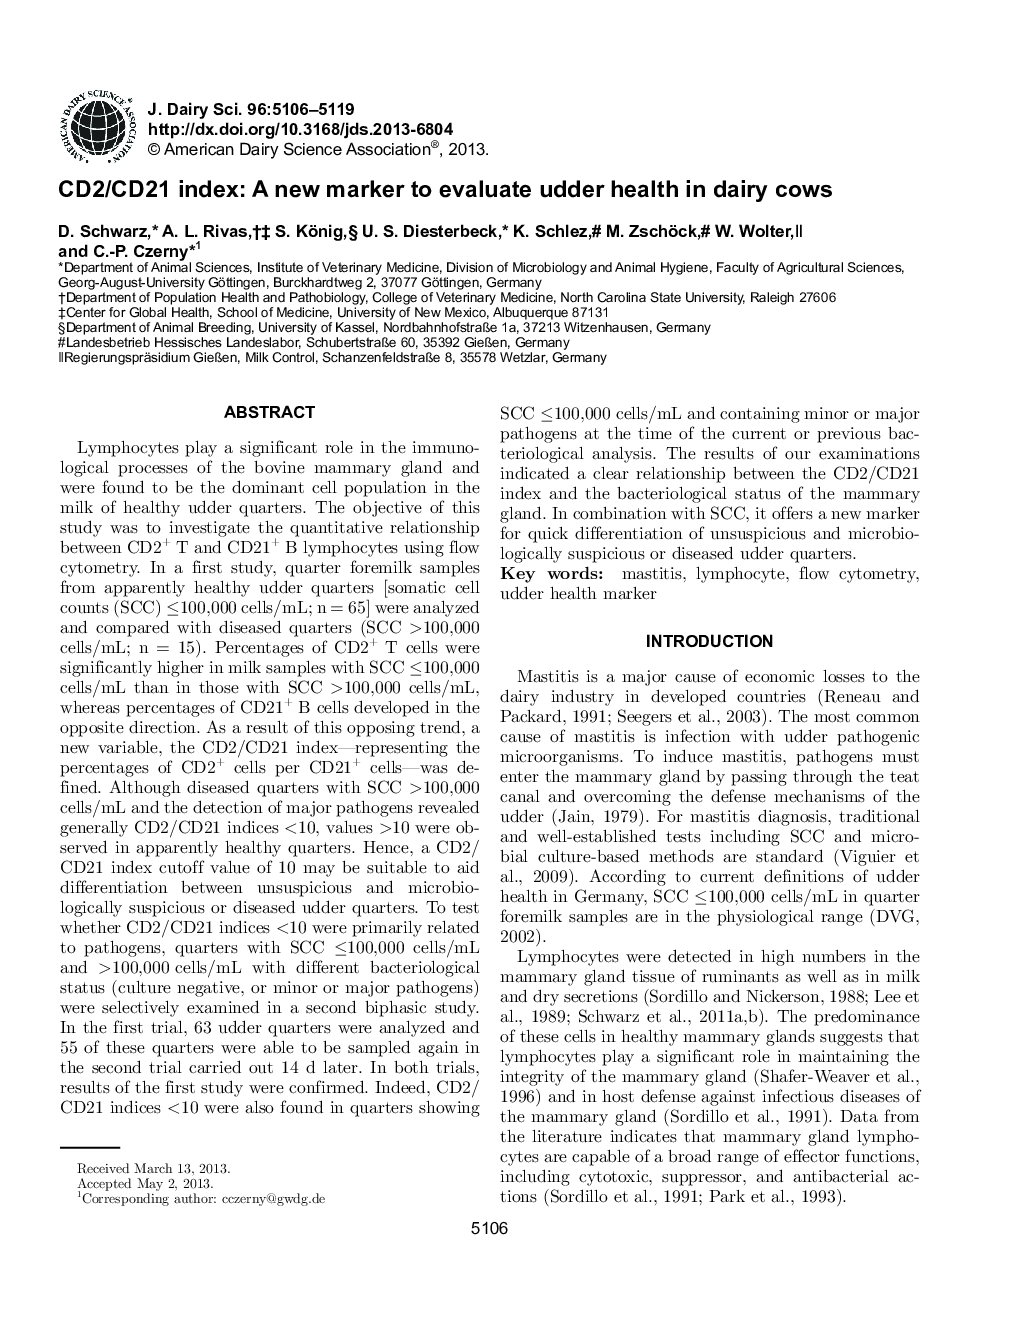 CD2/CD21 index: A new marker to evaluate udder health in dairy cows